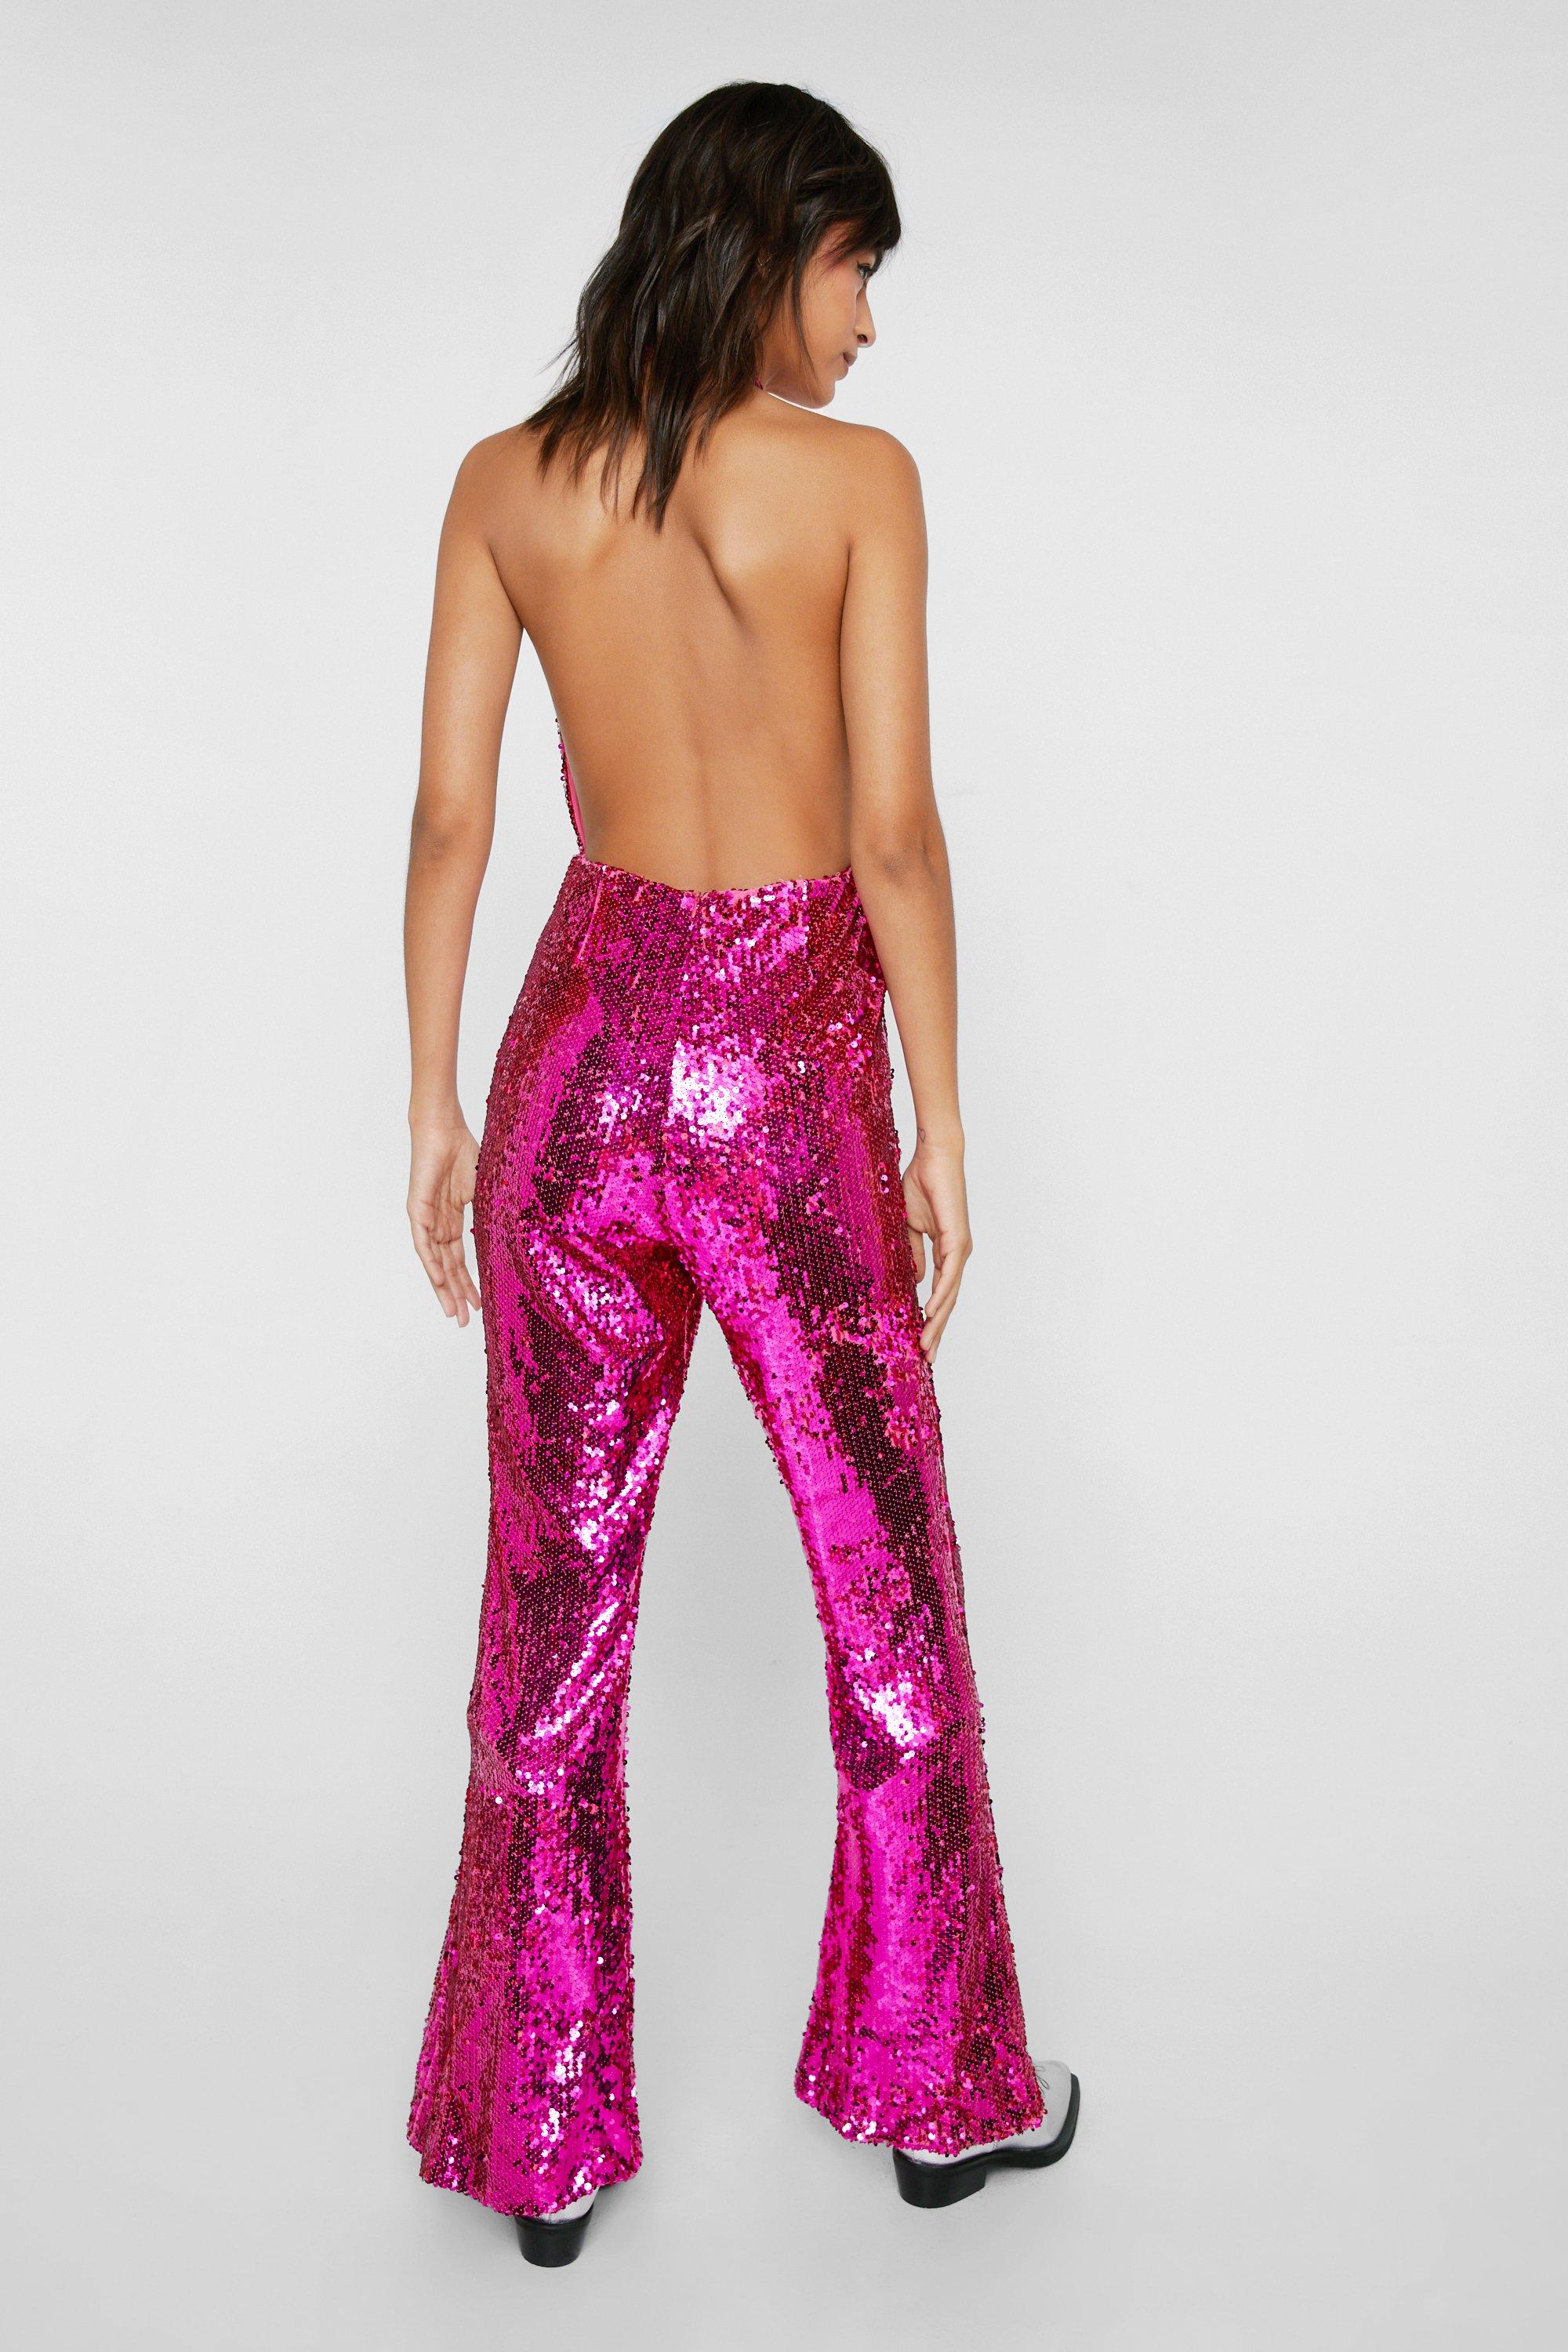 Nasty Gal Plus Size Pink Sequin Kick Flared Pants 18 NEW